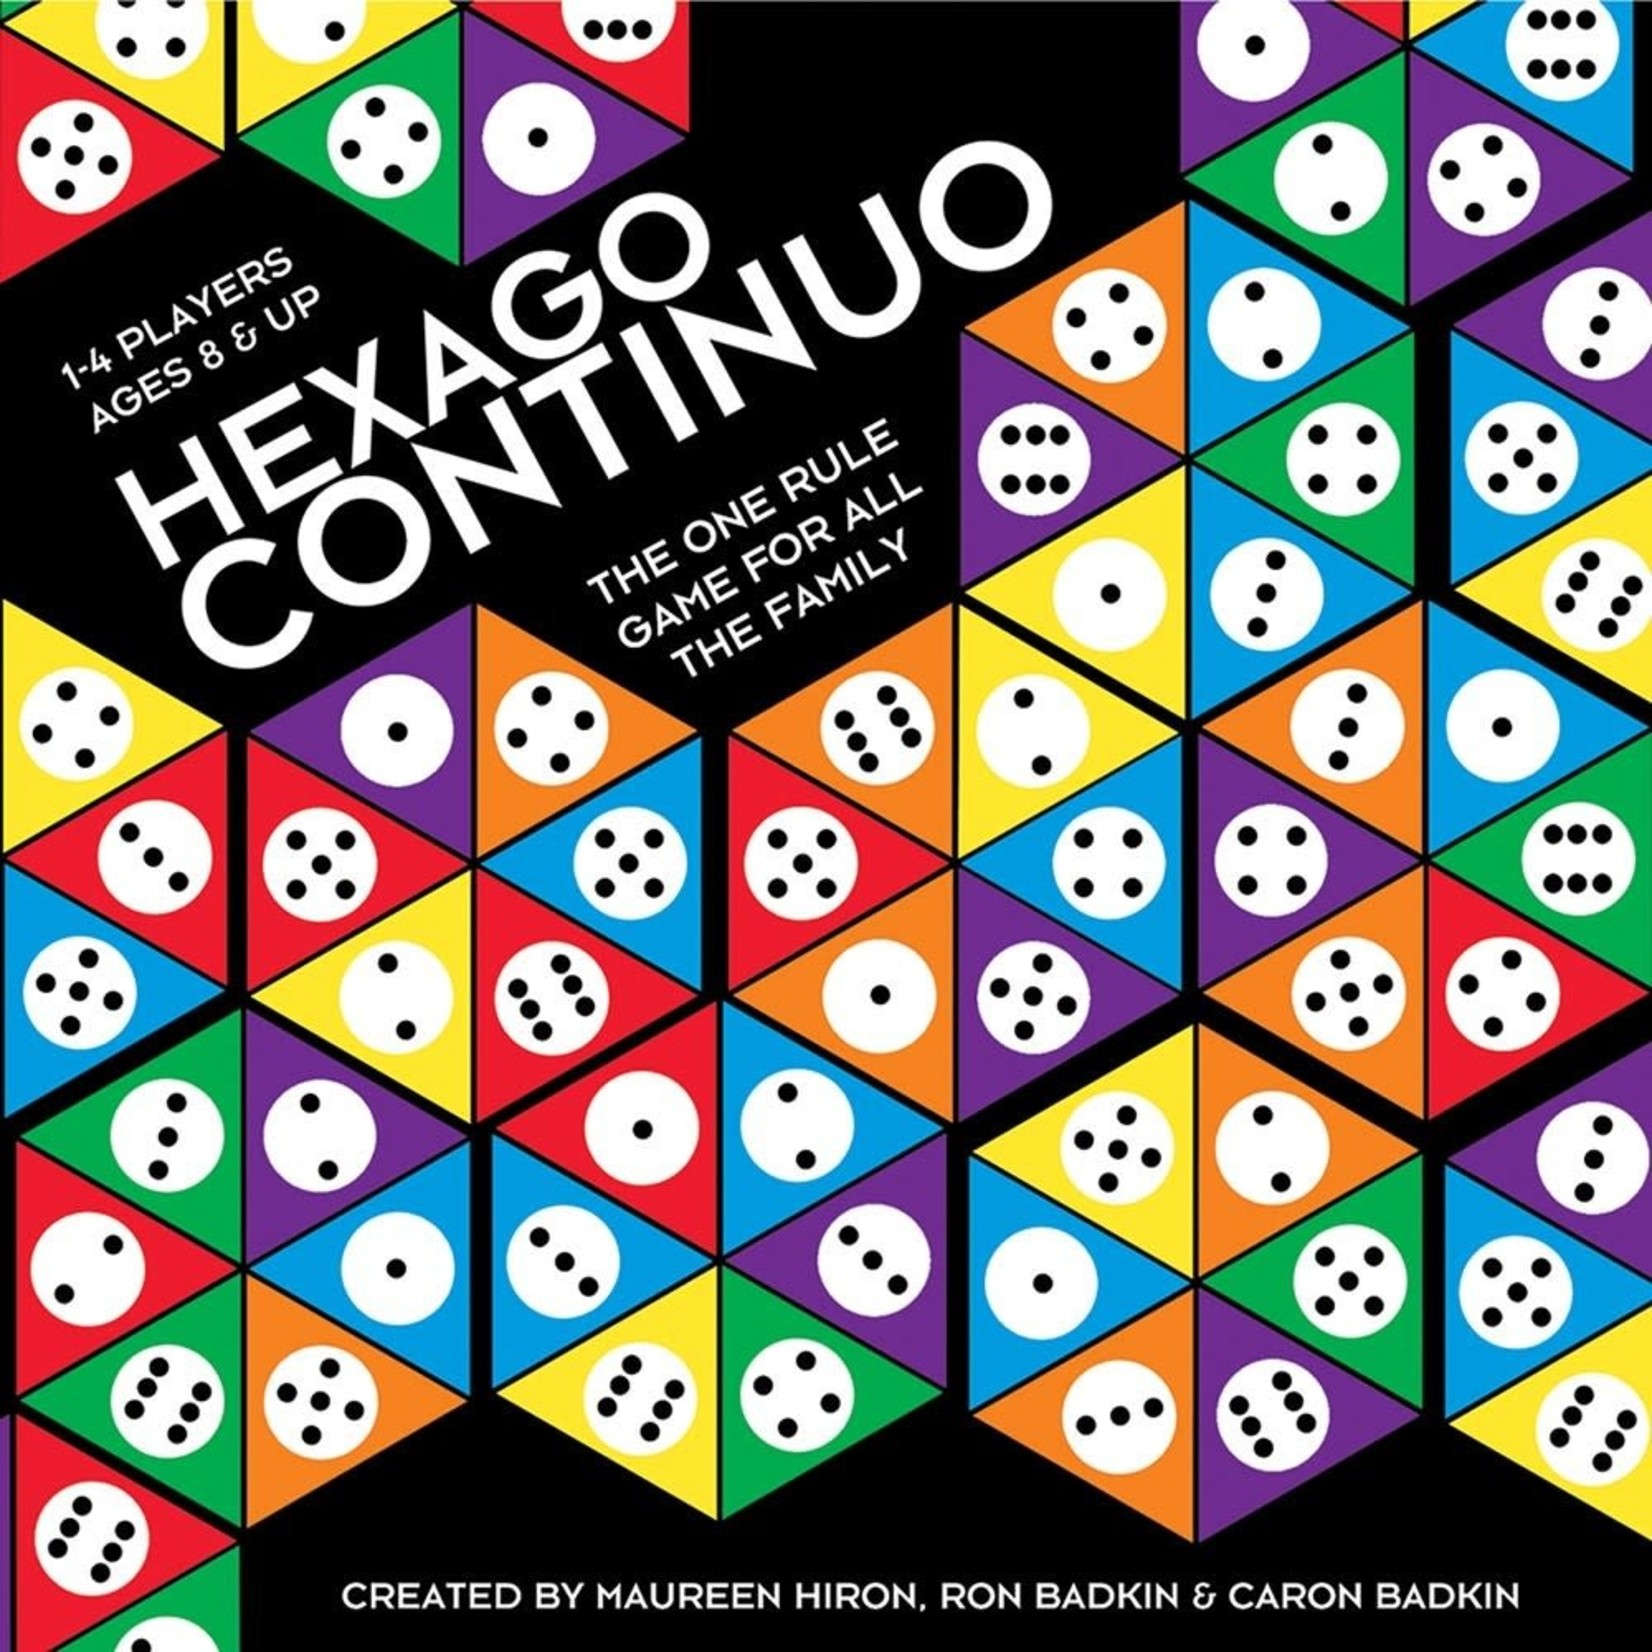 US Games Systems Hexago Continuo: The One Rule Game for All the Family